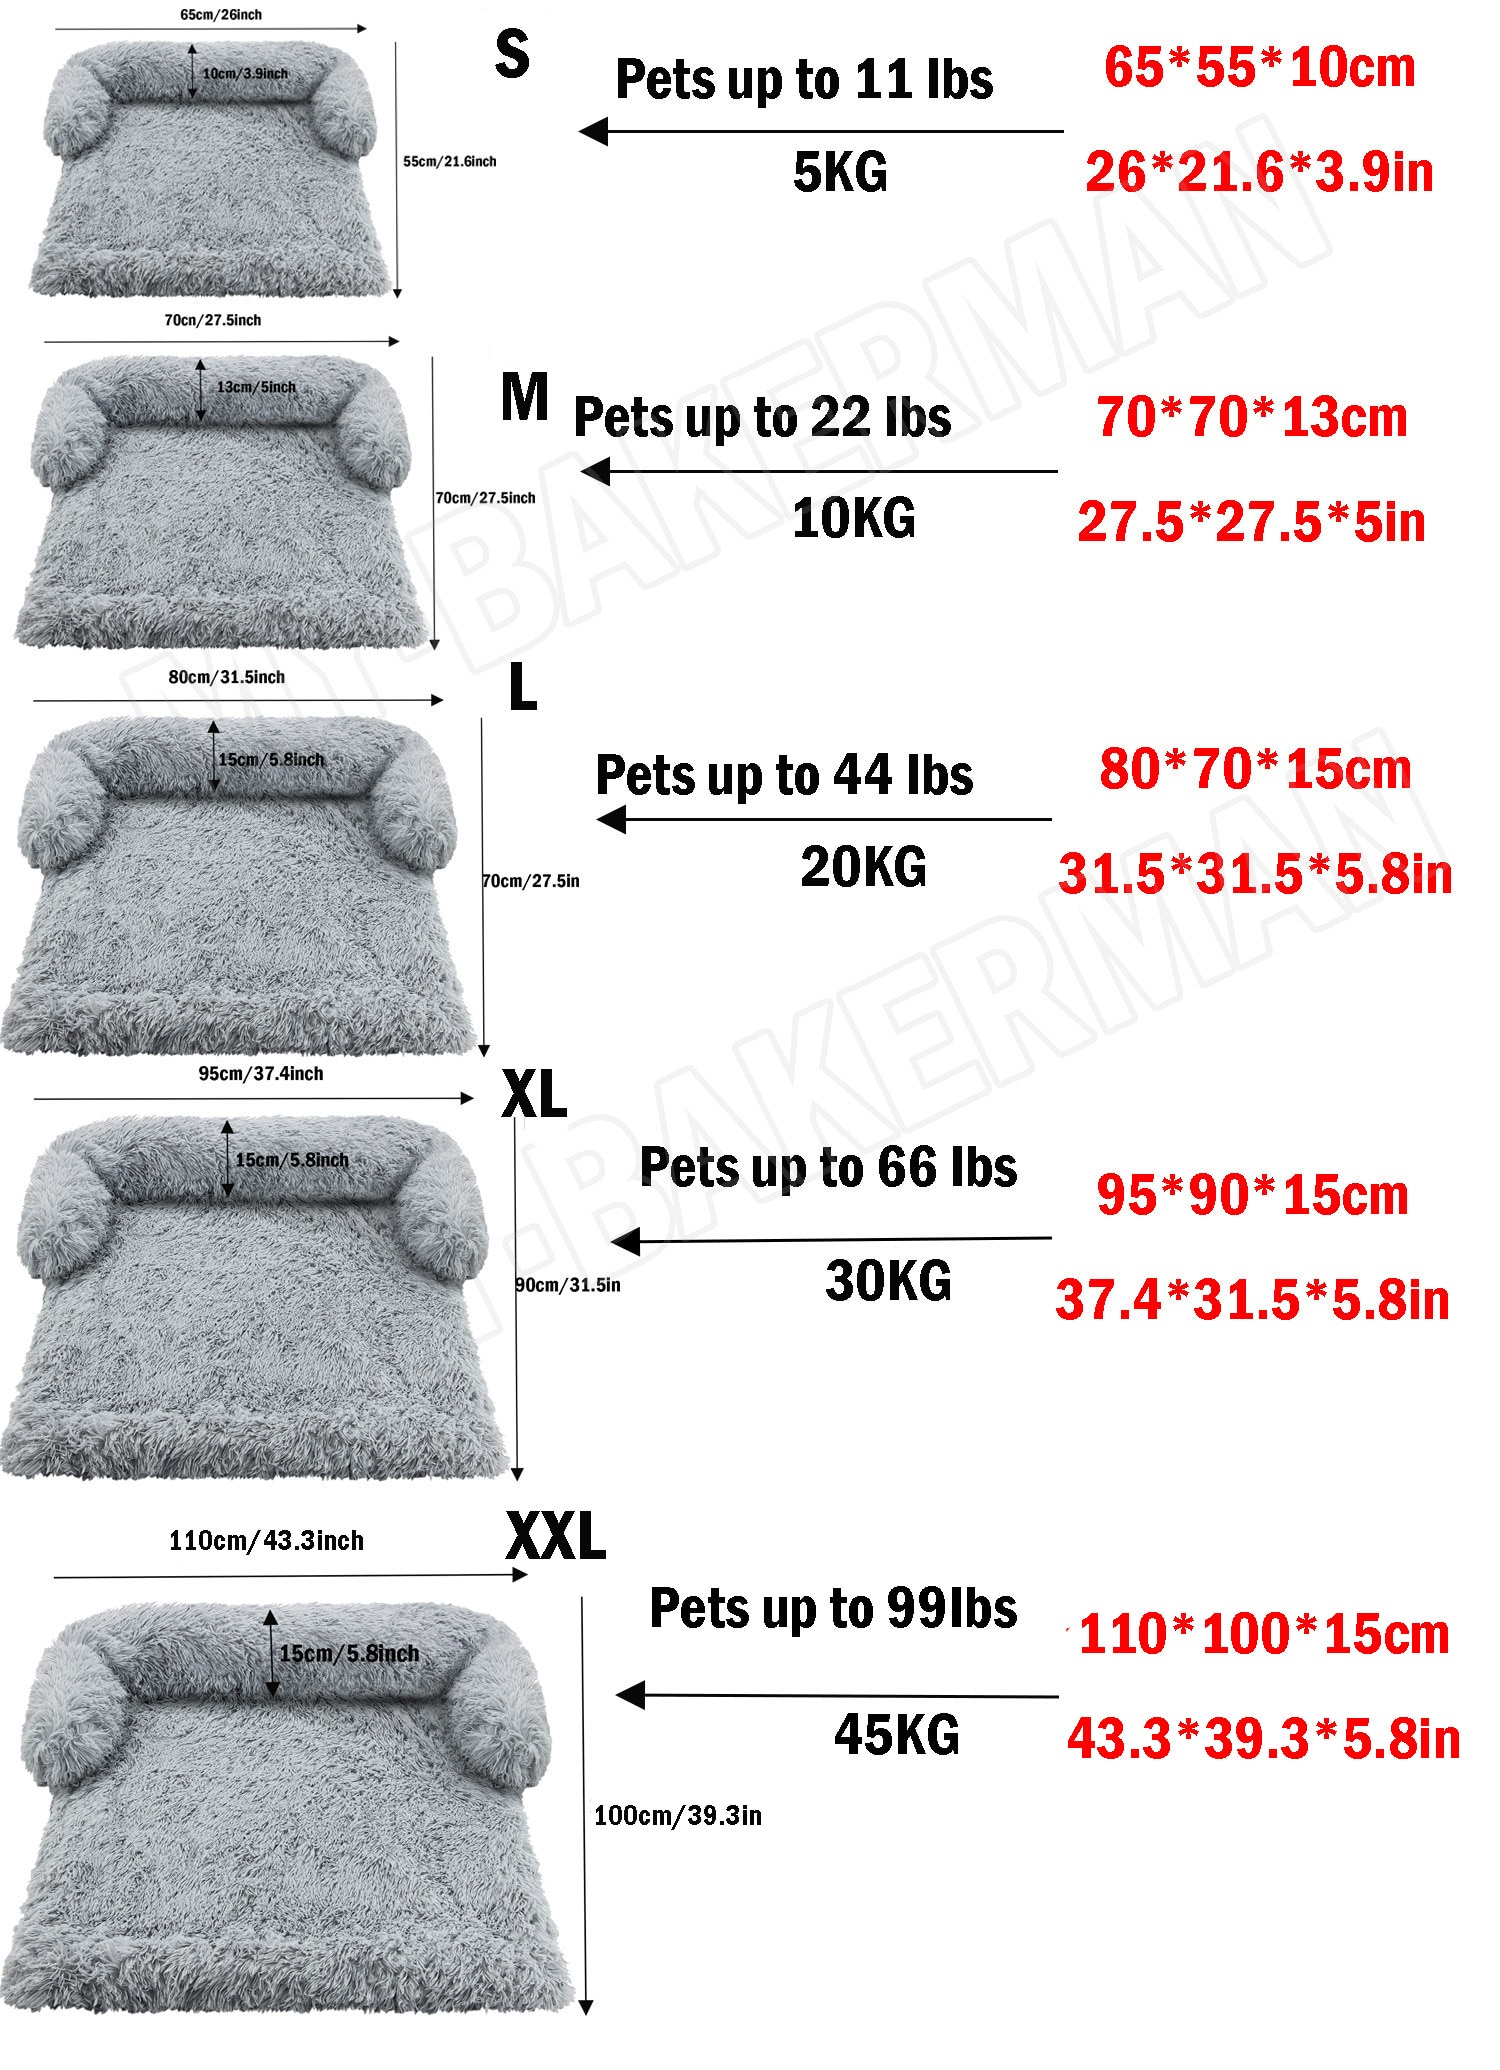 1067913213 1 - Large Plush Dog Sofa Bed Couch Protector - thepamperedpooch-co, pet-beds, dog-beds